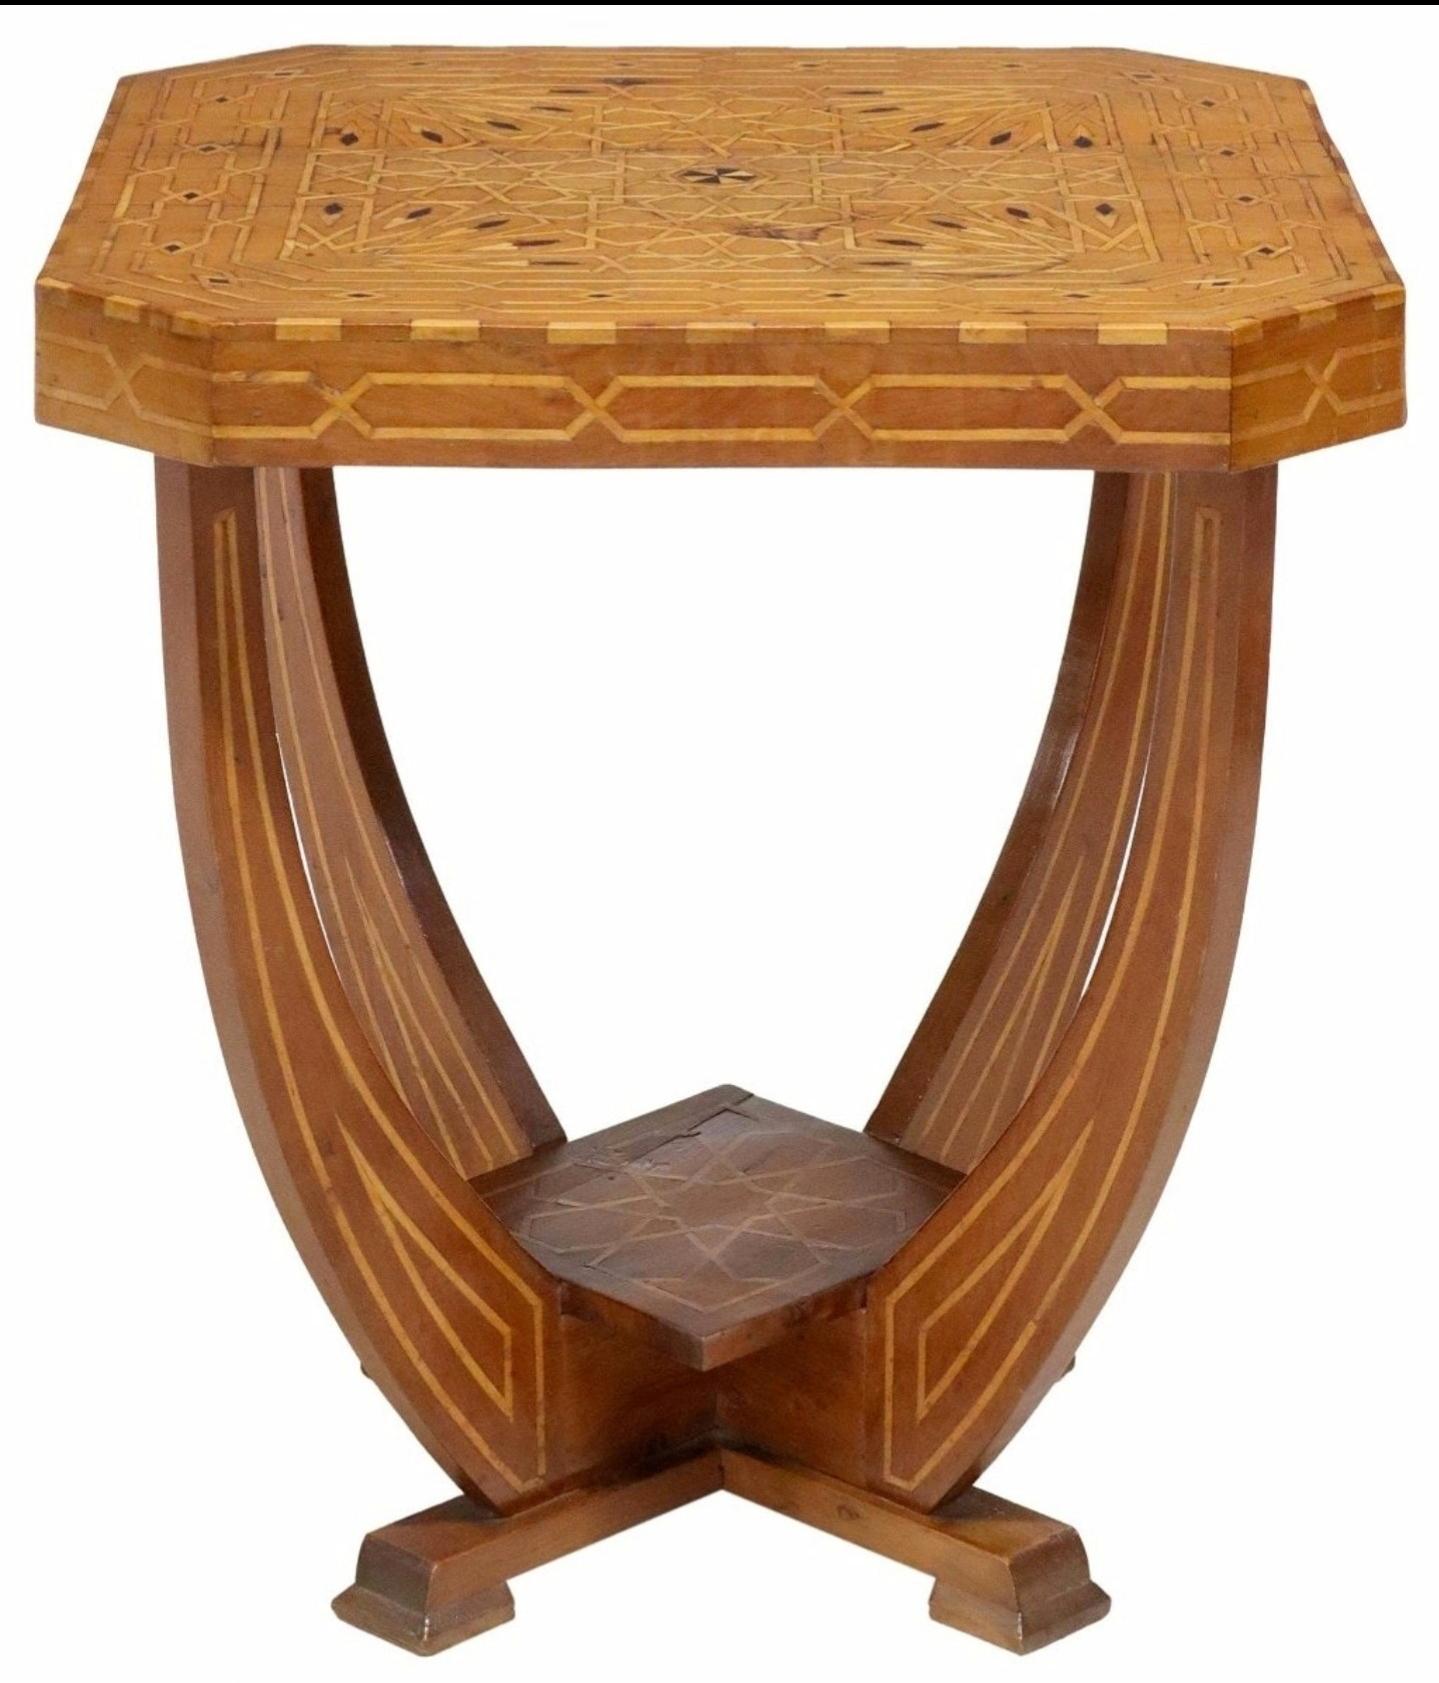 A magnificent period Italian Art Deco Moderne elaborately inlaid table. circa 1930 

Finely hand-crafted in Italy, most likely the Sorrento - Naples region of Southern Italy, featuring a walnut two-tier design with intricate contrasting maple and